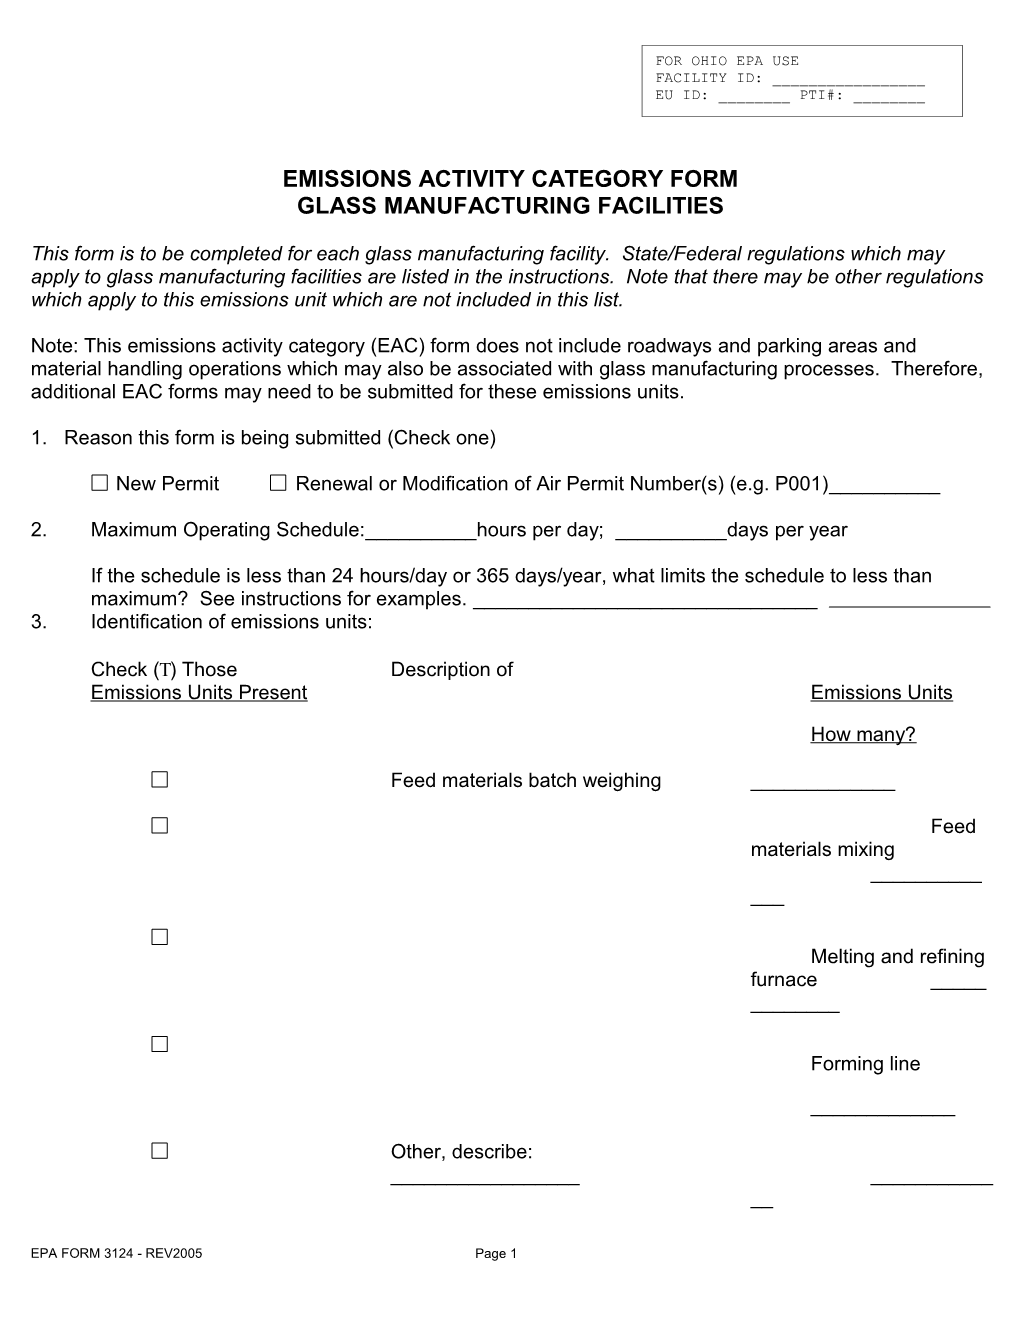 Emissions Activity Category Form